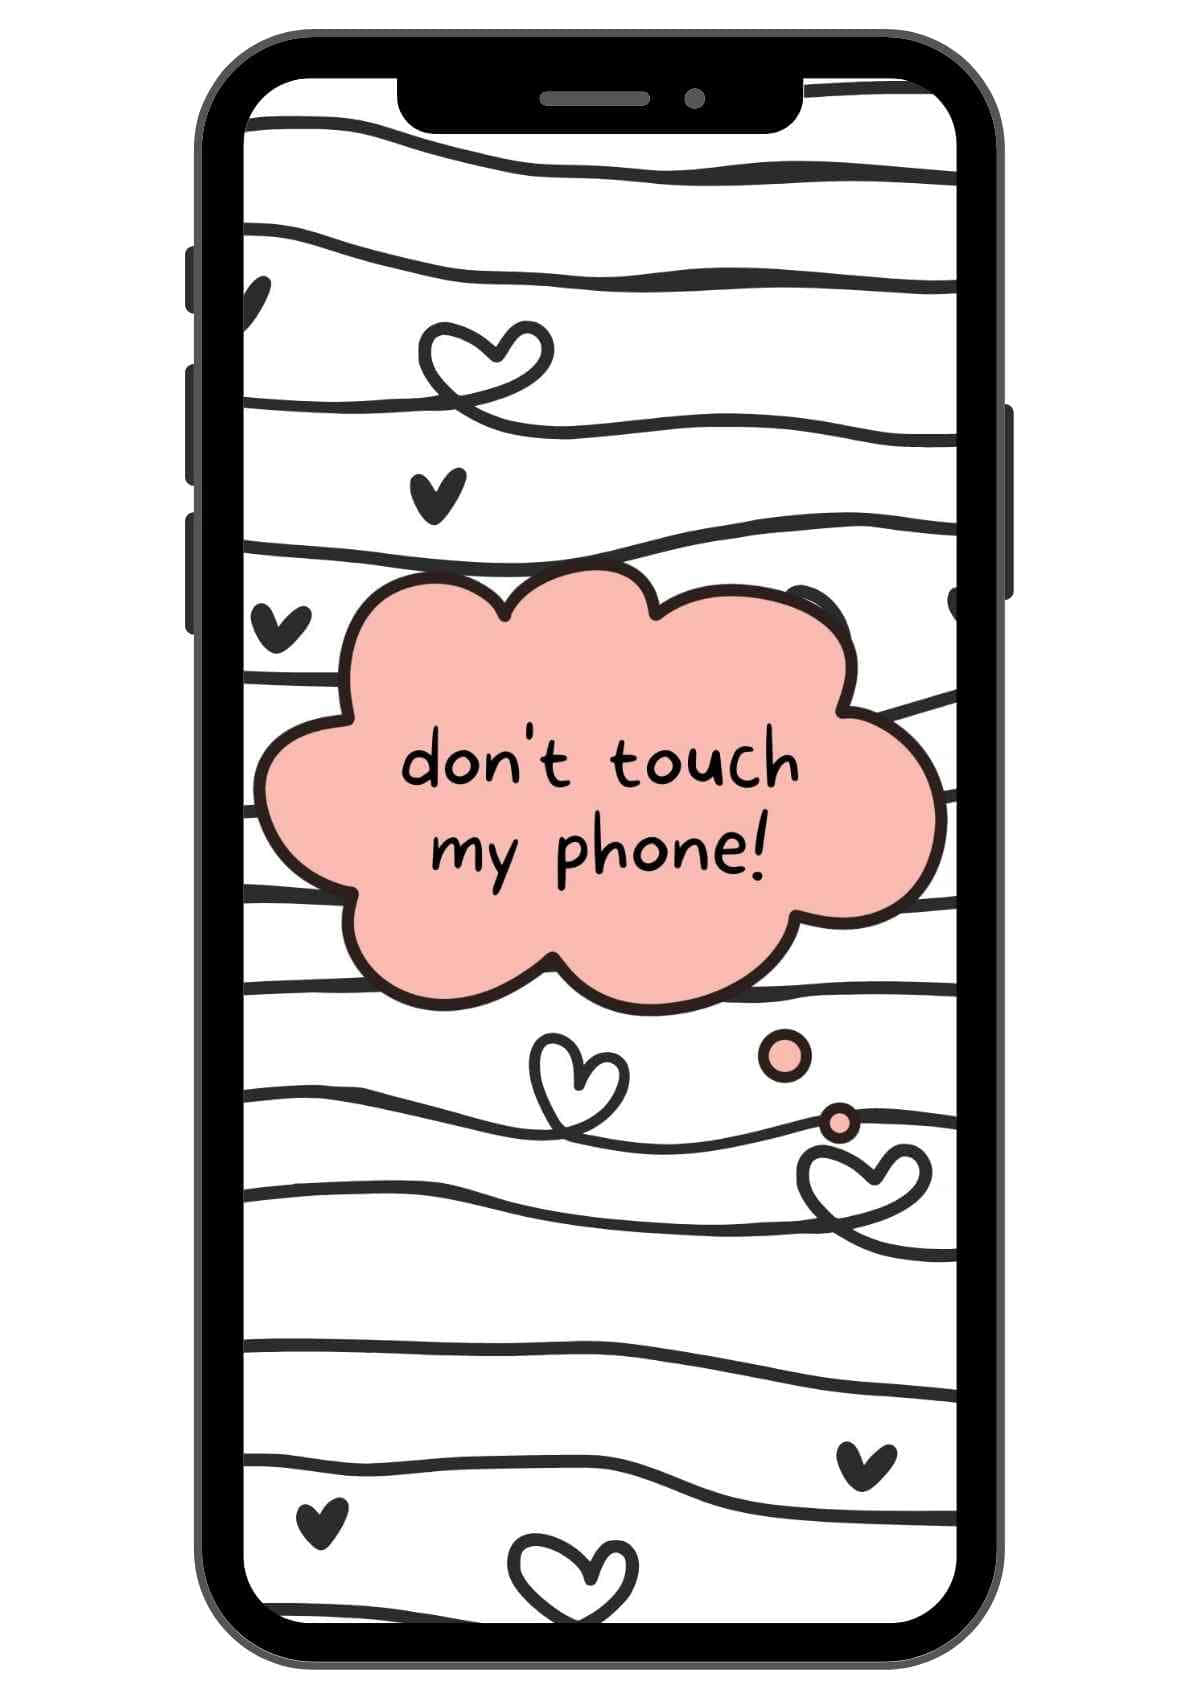 Don't Touch My Phone Iphone Wallpaper Wallpaper